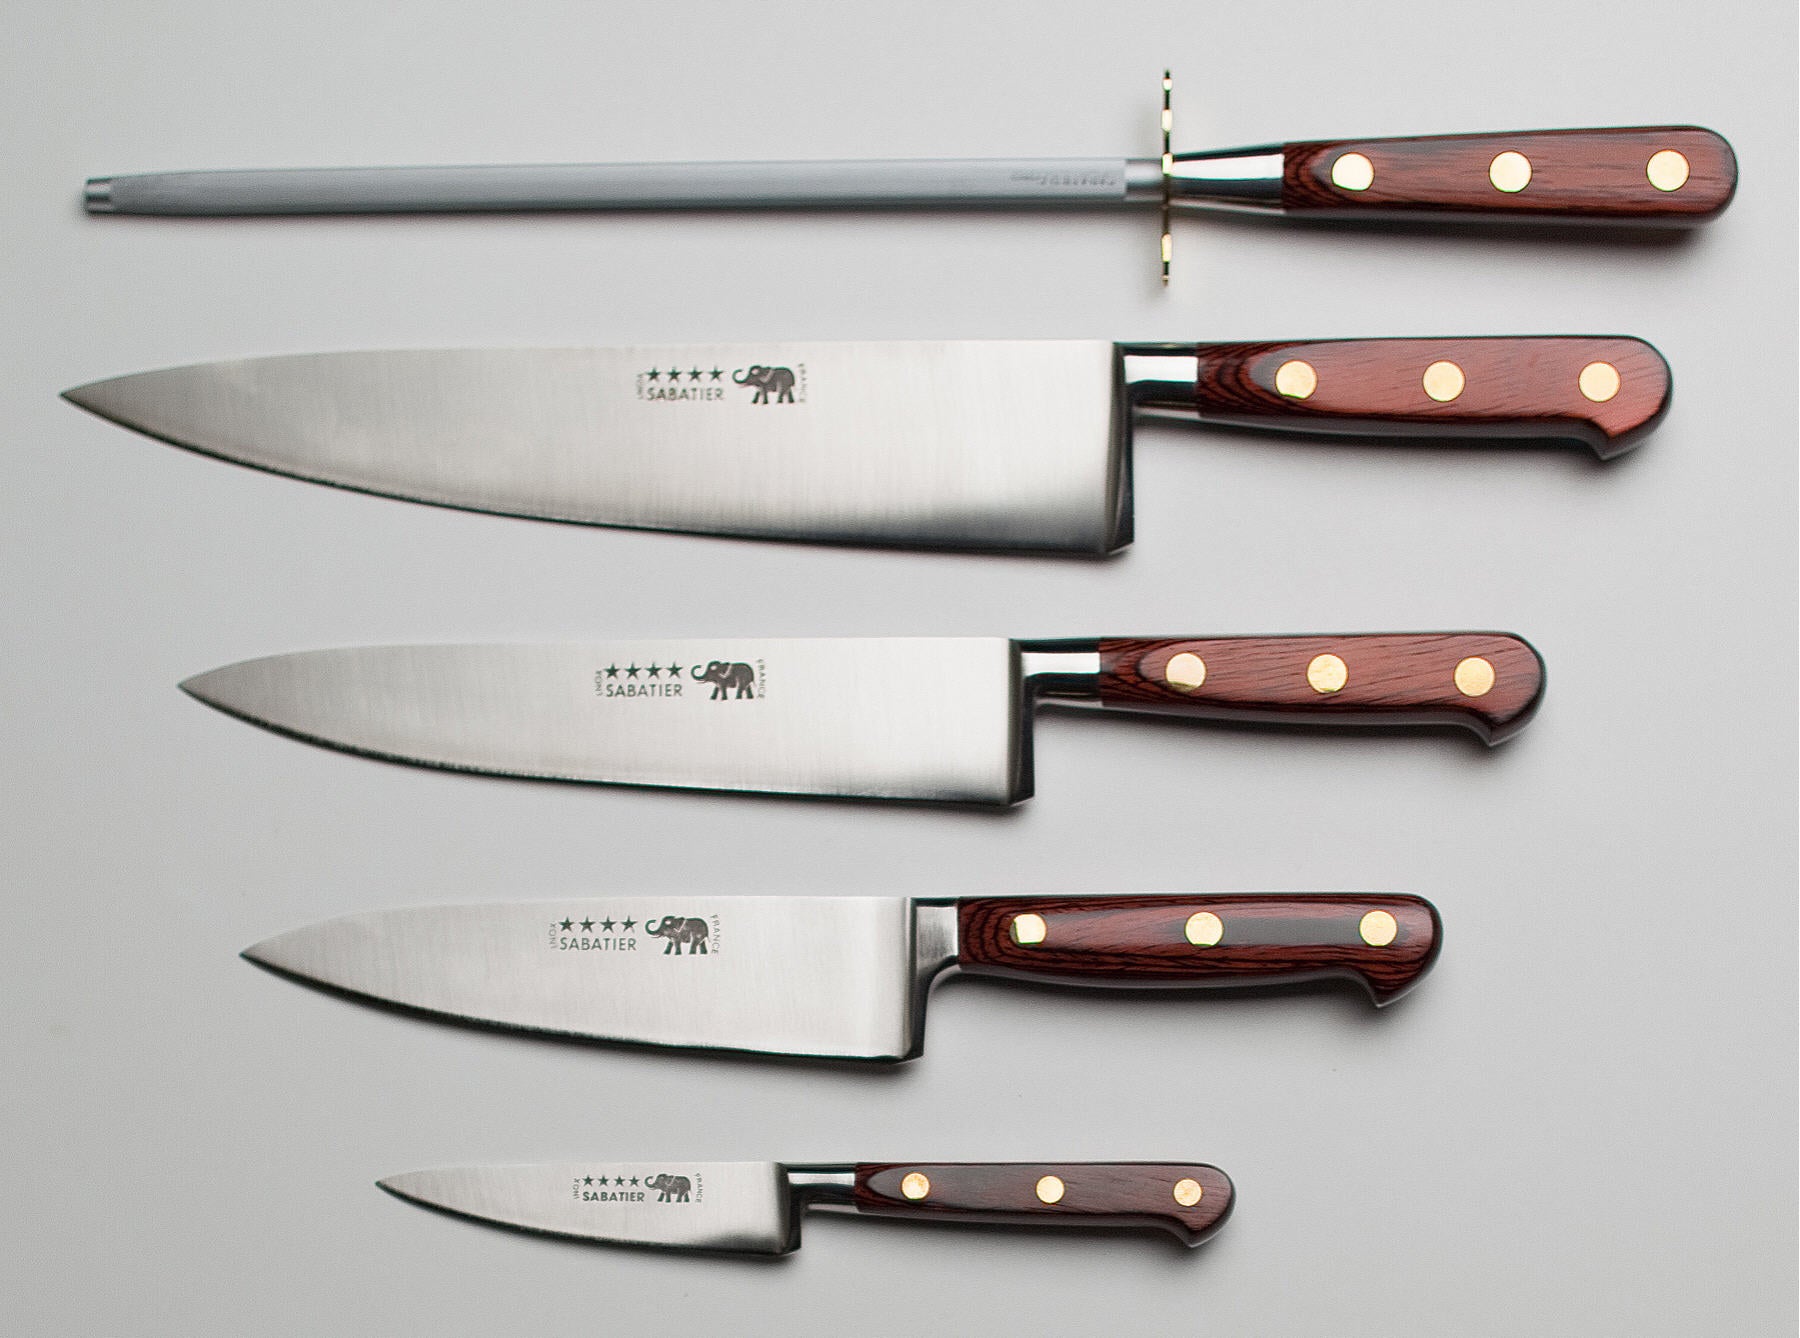 5 pc Chef Knife Set - Stainless Steel